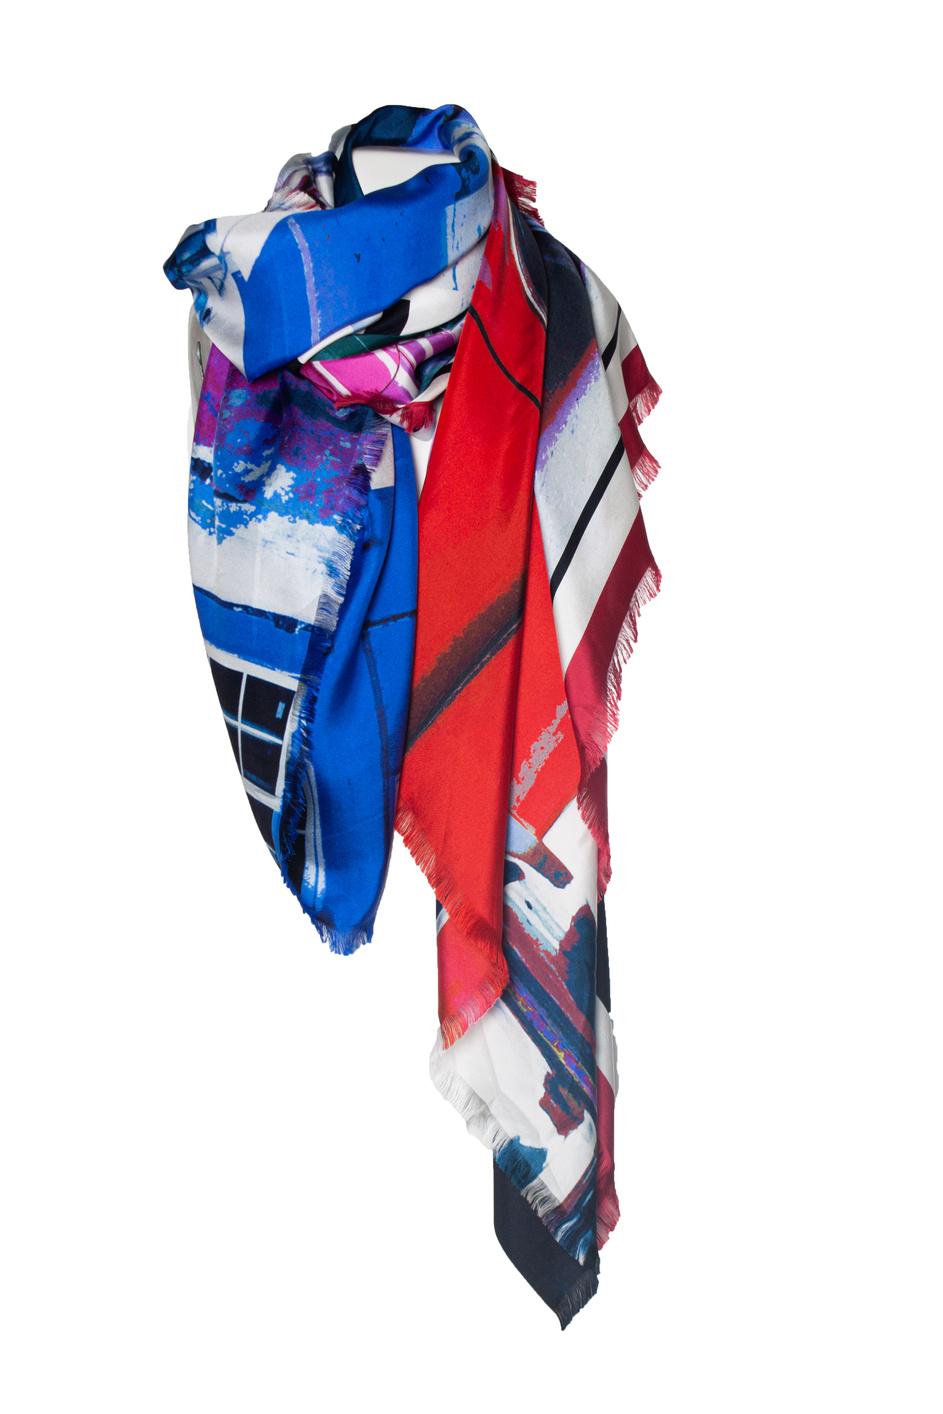 Chanel, Havana scarf. The item is new - unworn.

• CONDITION: new - unworn 

• SIZE: one size

• MEASUREMENTS: length 135 cm, width 190 cm

• MATERIAL: 100% silk 

• CARE: dry cleaning 

• COLOR: multicolor

